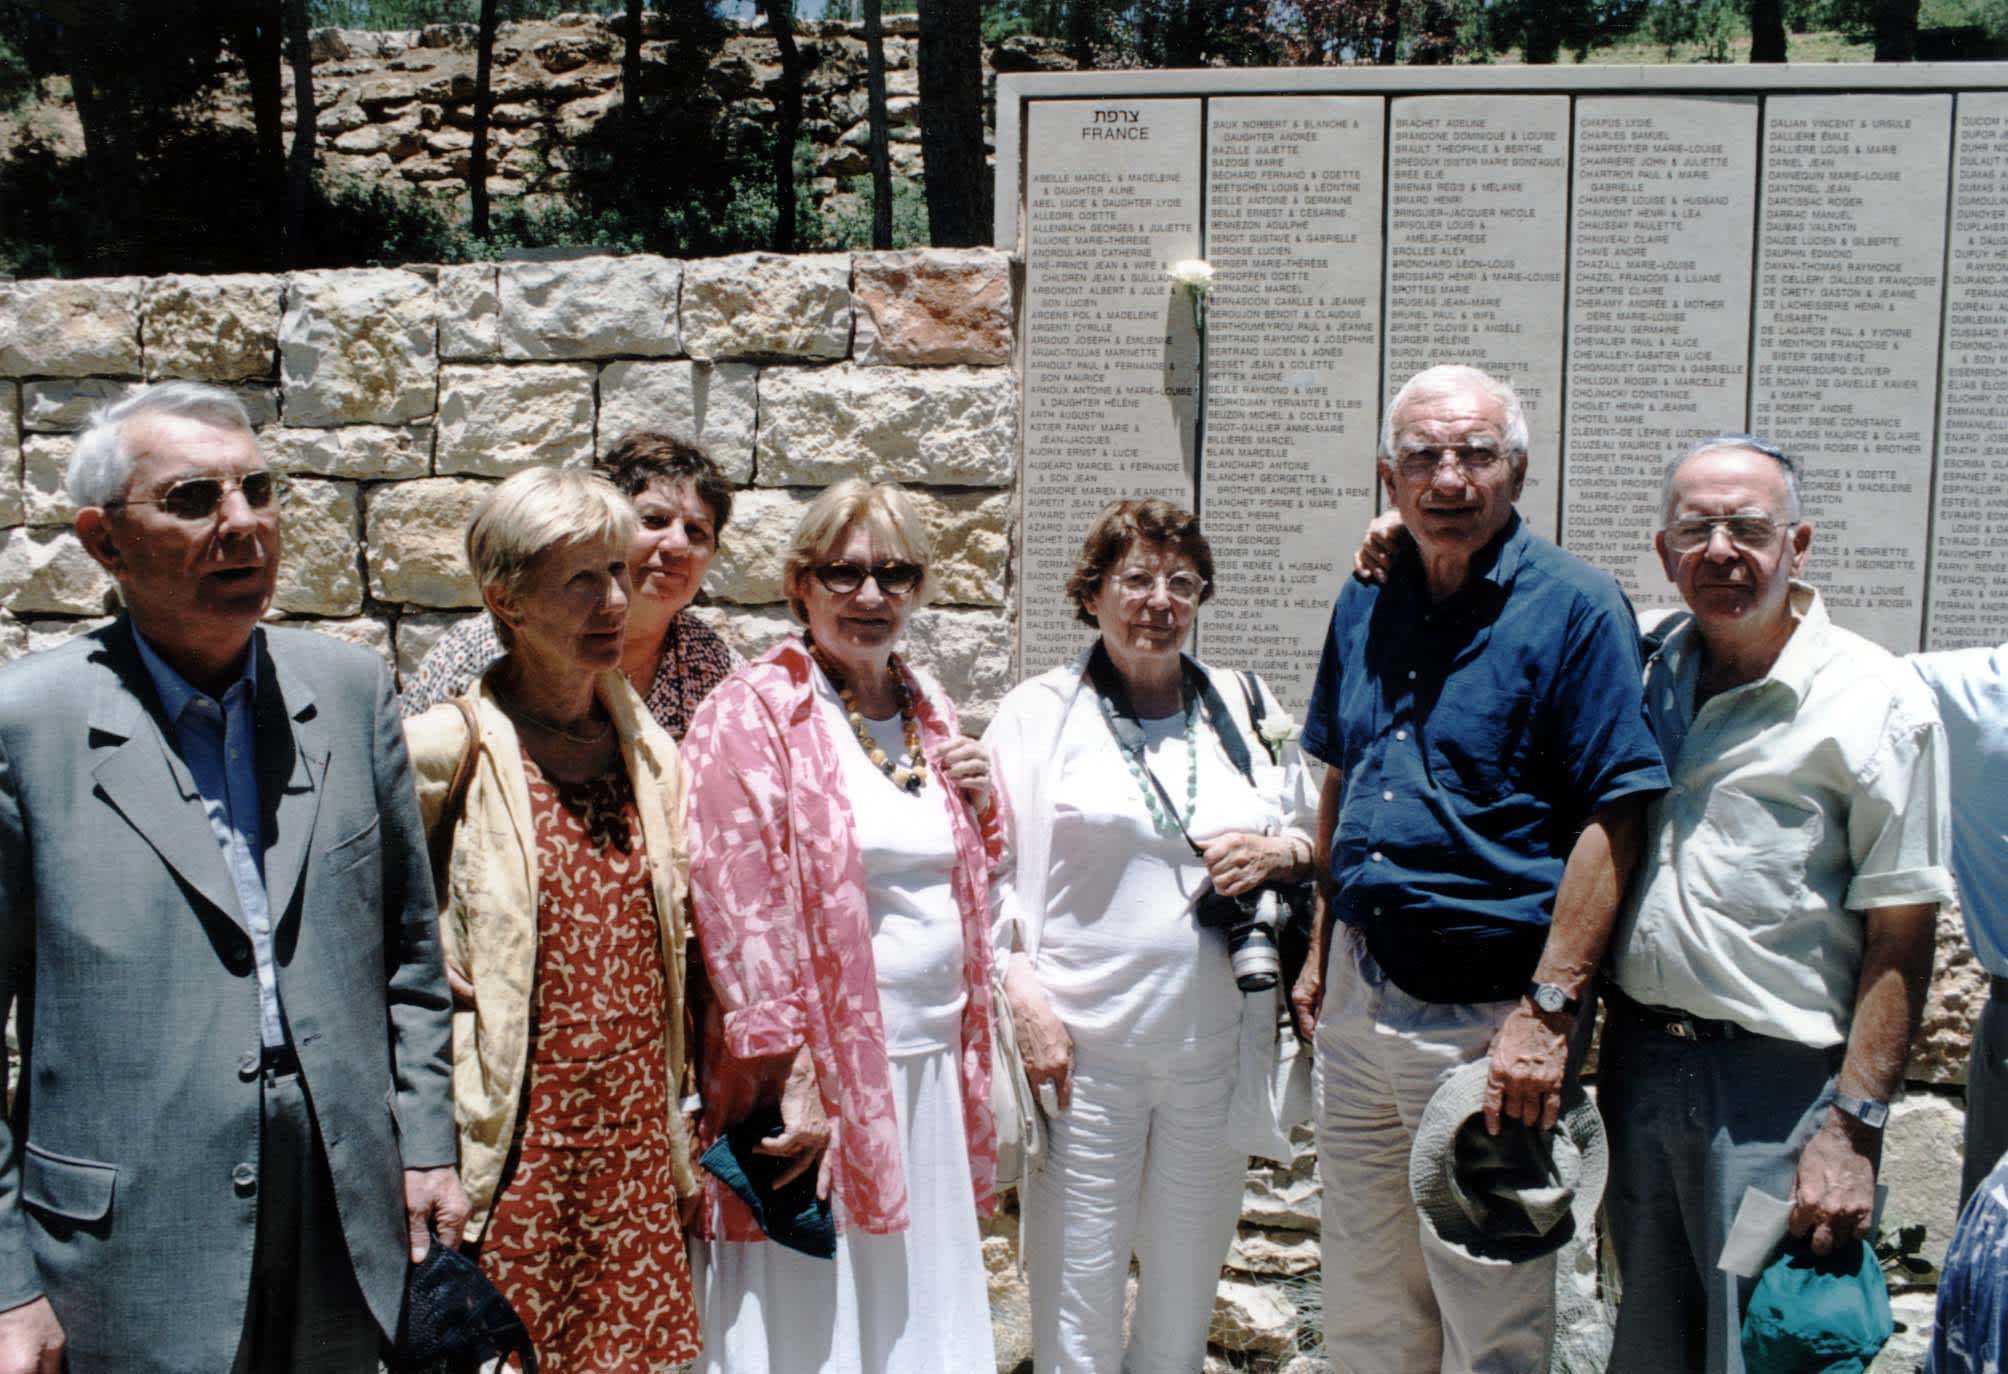 Marc Nahum the survivor, on the extreme right. 3rd from the right is Jeanne Lehman. Yad Vashem